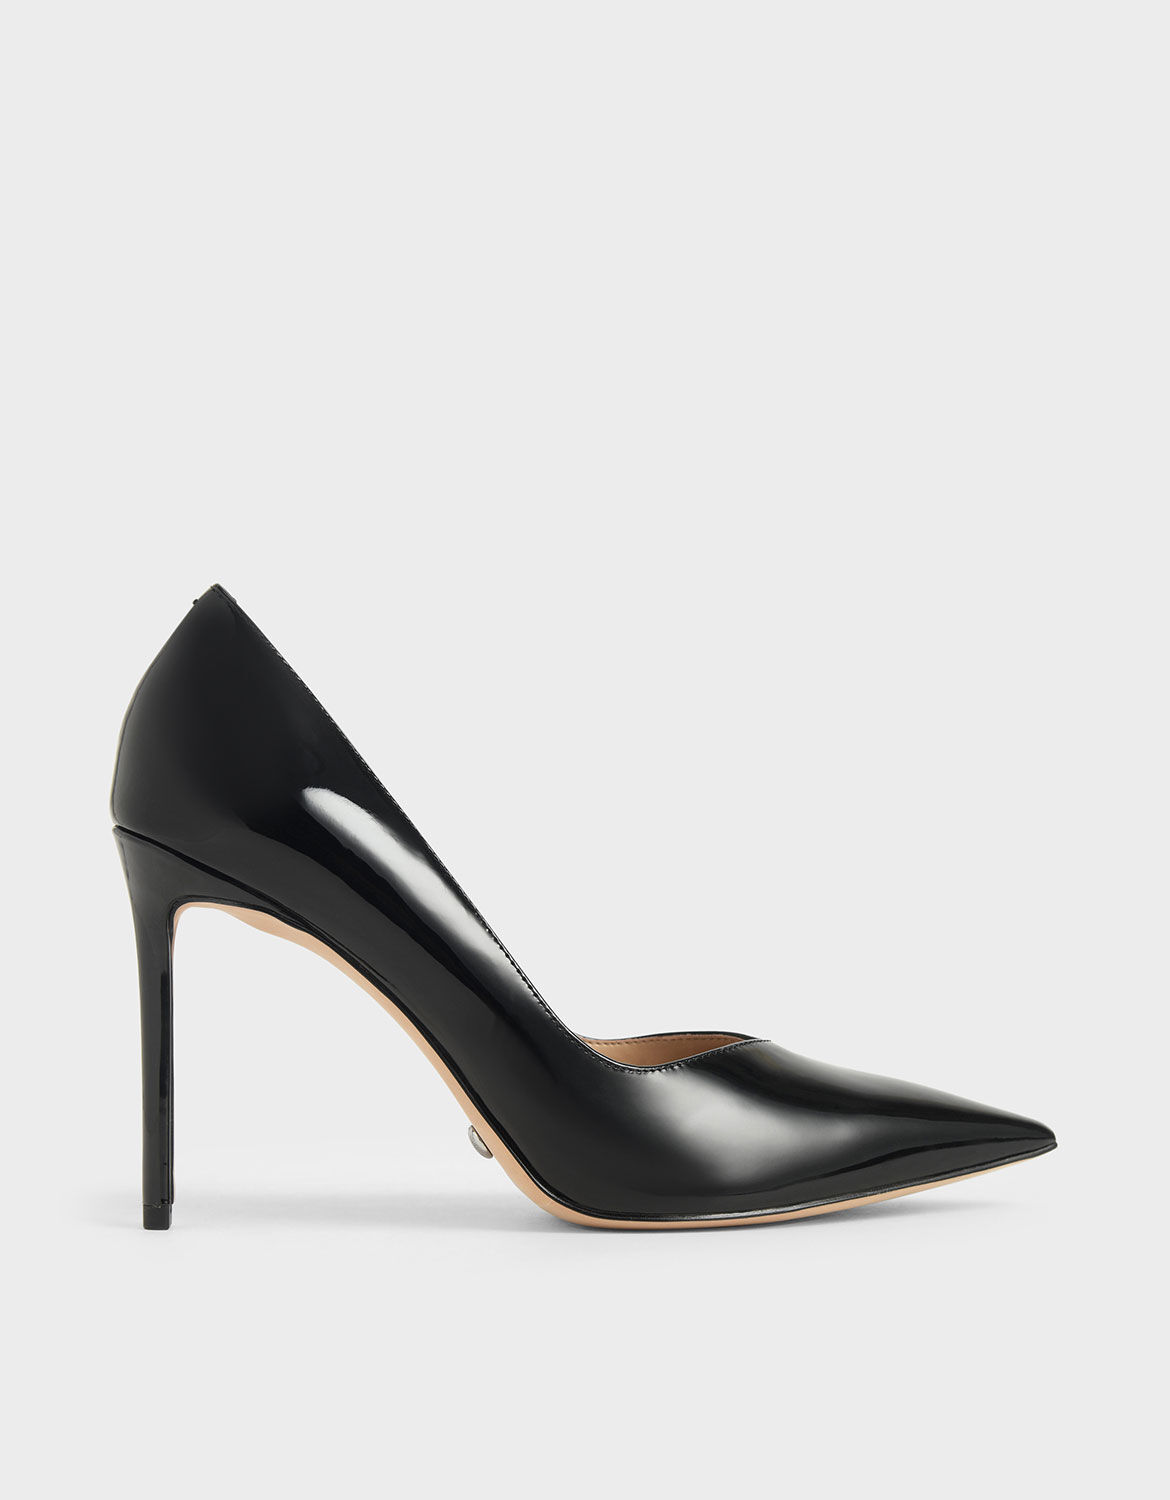 Black Patent Leather Pointed Toe Pumps 